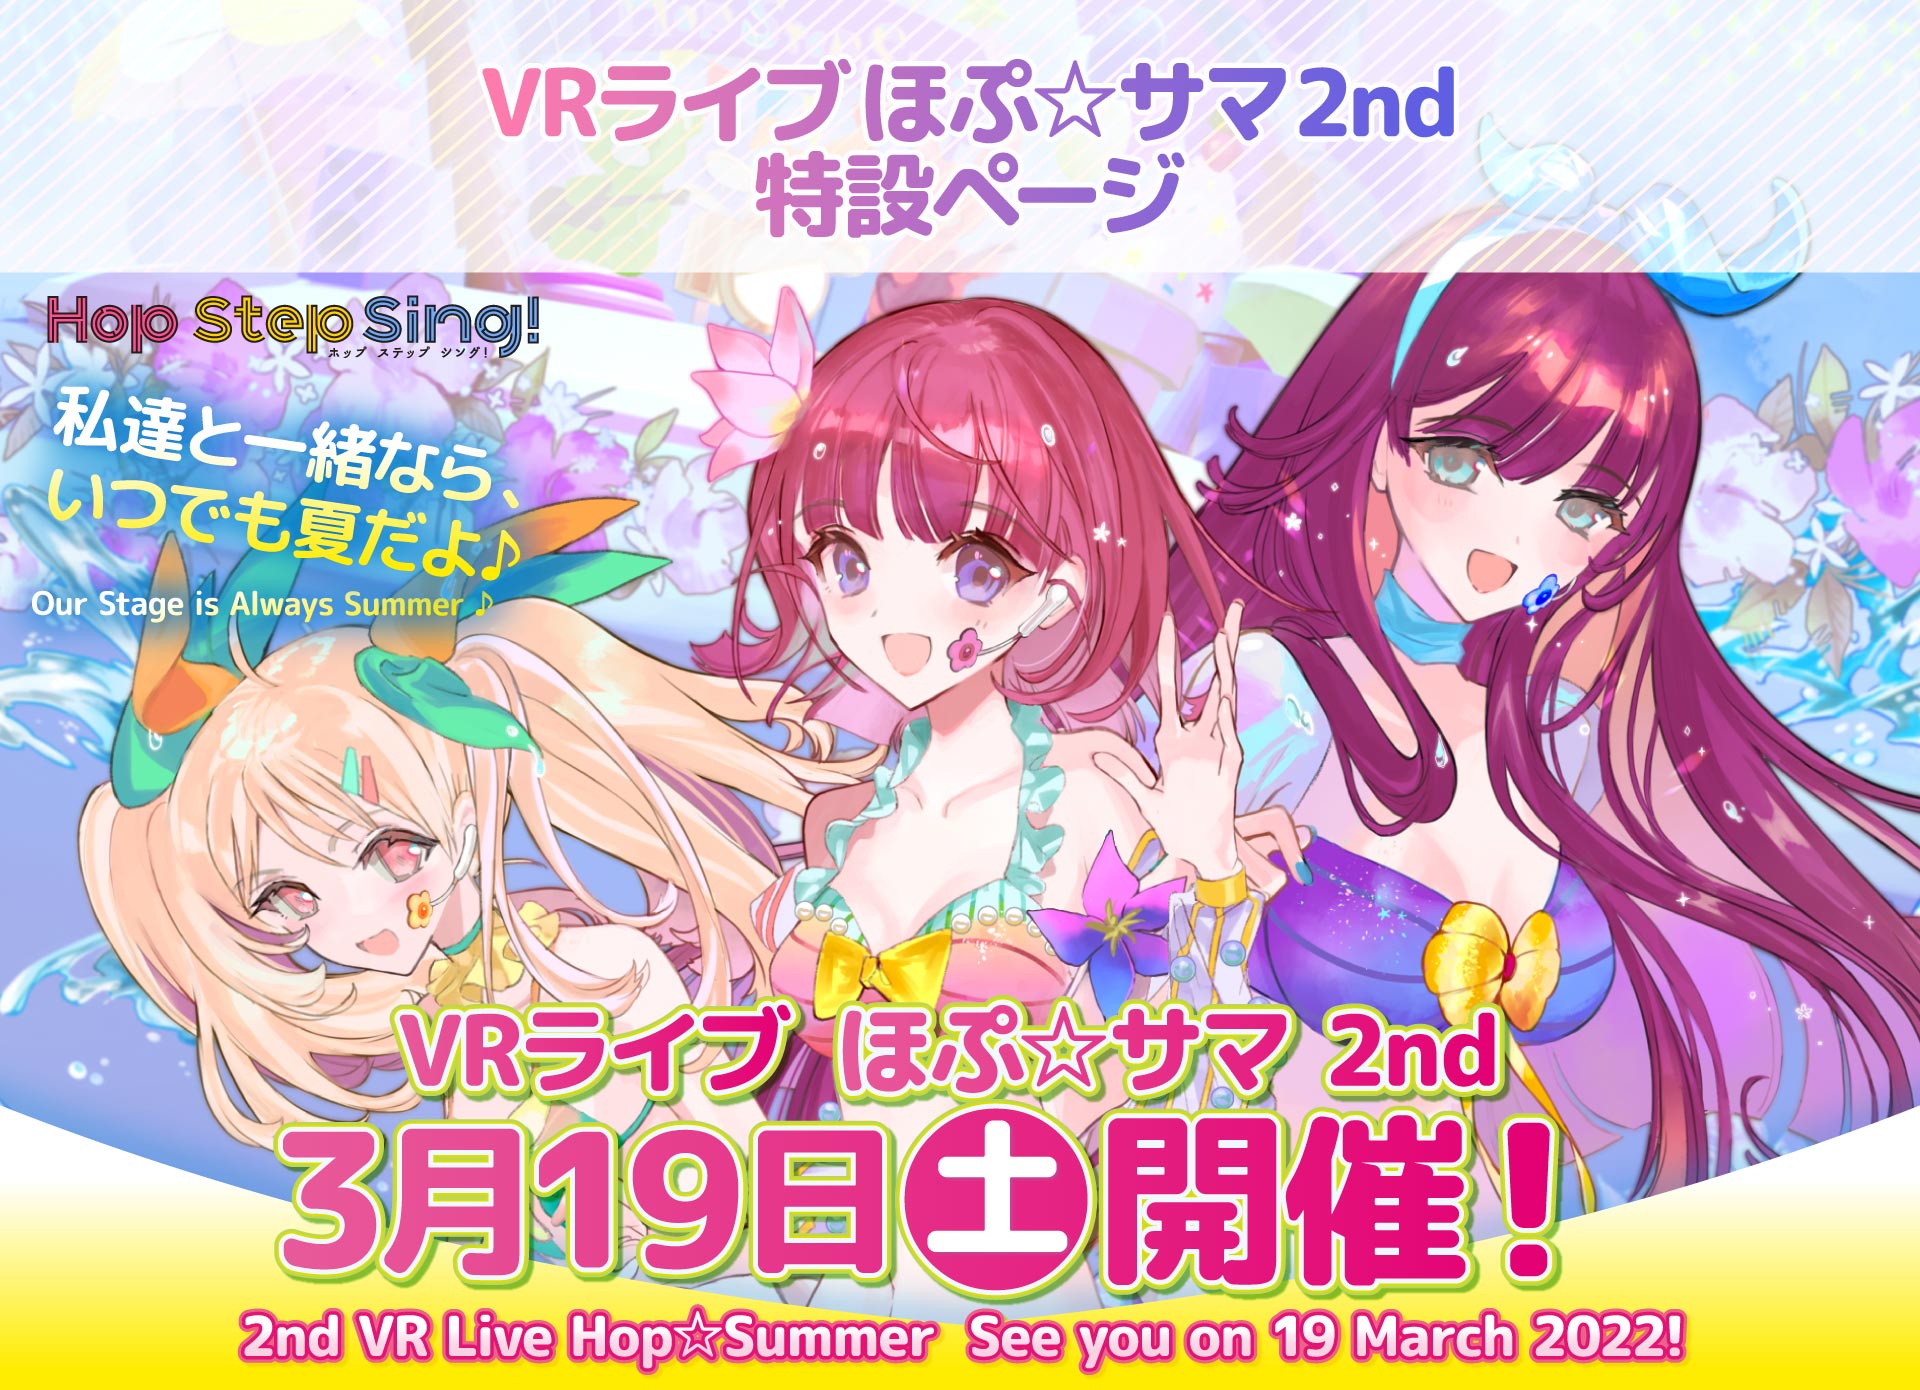 VRライブ『ほぷ☆サマ 2nd』3/19(土)開催！｜2nd VR Live Hop☆Summer See you on 19 March 2022!